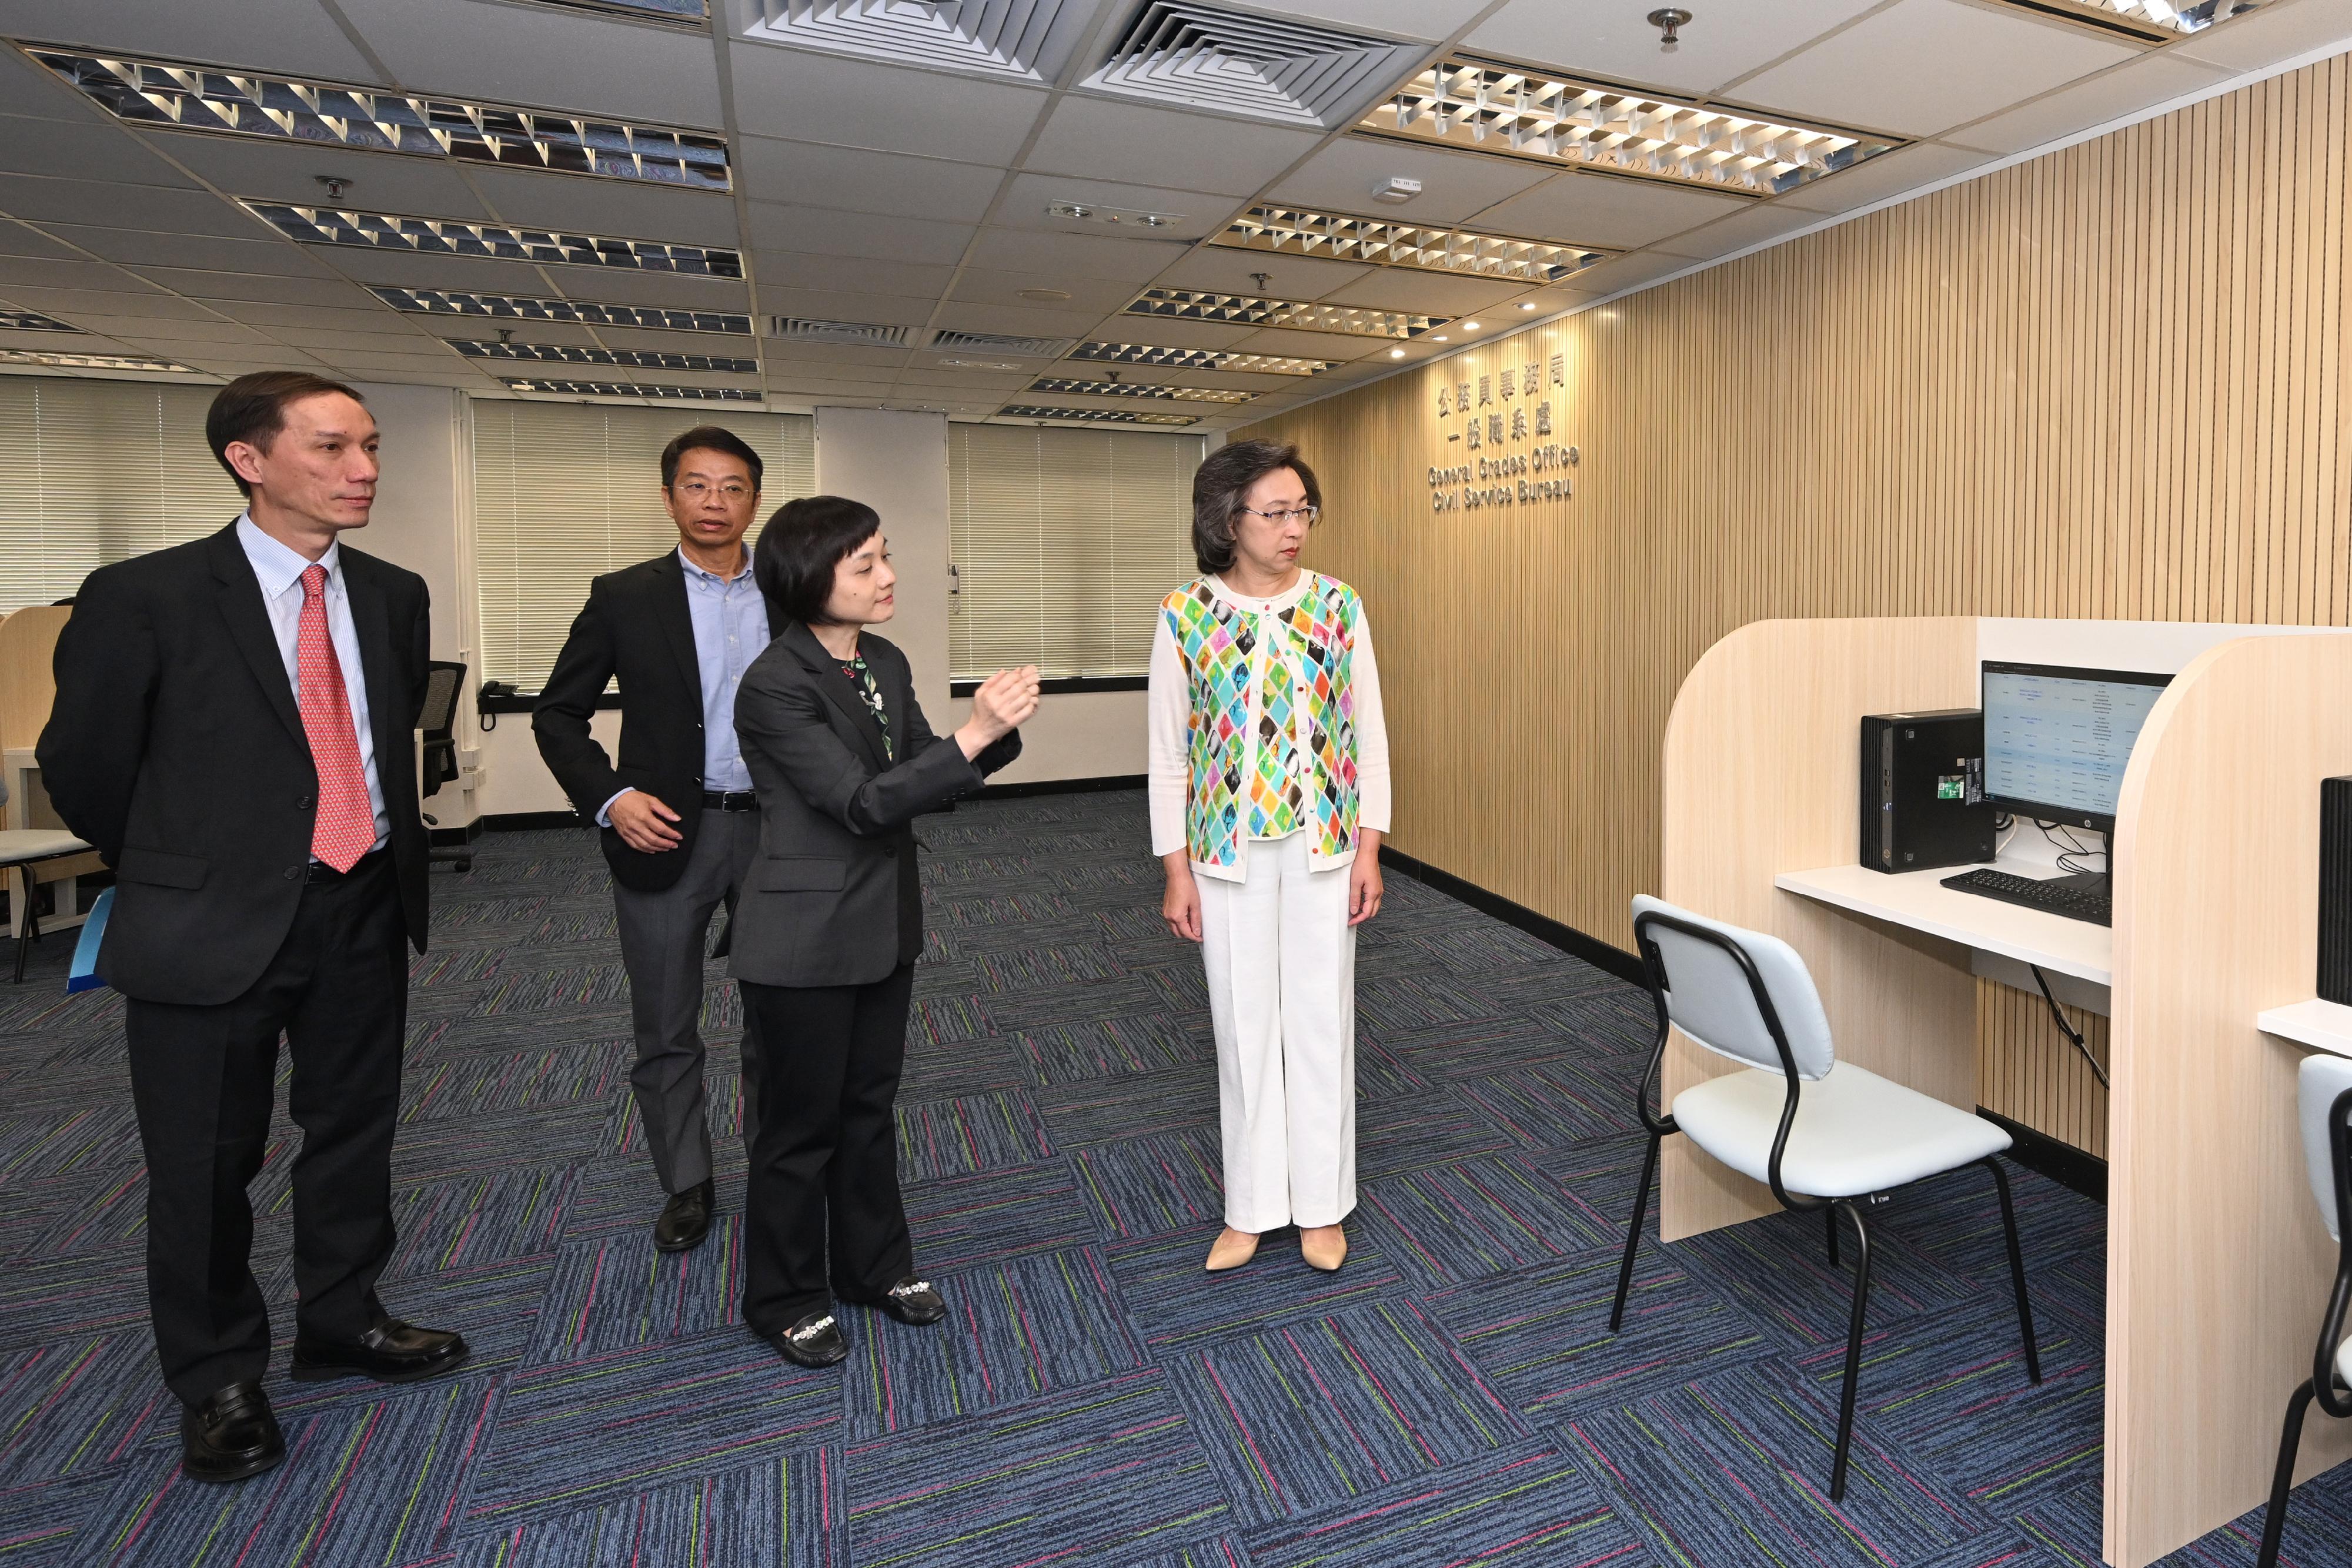 The Recruitment Centre, General Grades Office of the Civil Service Bureau officially commenced operation today (October 6) to conduct year-round recruitment for the posts of Assistant Clerical Officer, Clerical Assistant and Personal Secretary II. Photo shows the Secretary for the Civil Service, Mrs Ingrid Yeung (first right), and the Permanent Secretary for the Civil Service, Mr Clement Leung (second left), visiting the Recruitment Centre to learn how the candidates who wish to apply for the posts submit online applications via the computers at the Recruitment Centre. Looking on is  the Director of General Grades of the Civil Service Bureau, Mr Hermes Chan (first left).